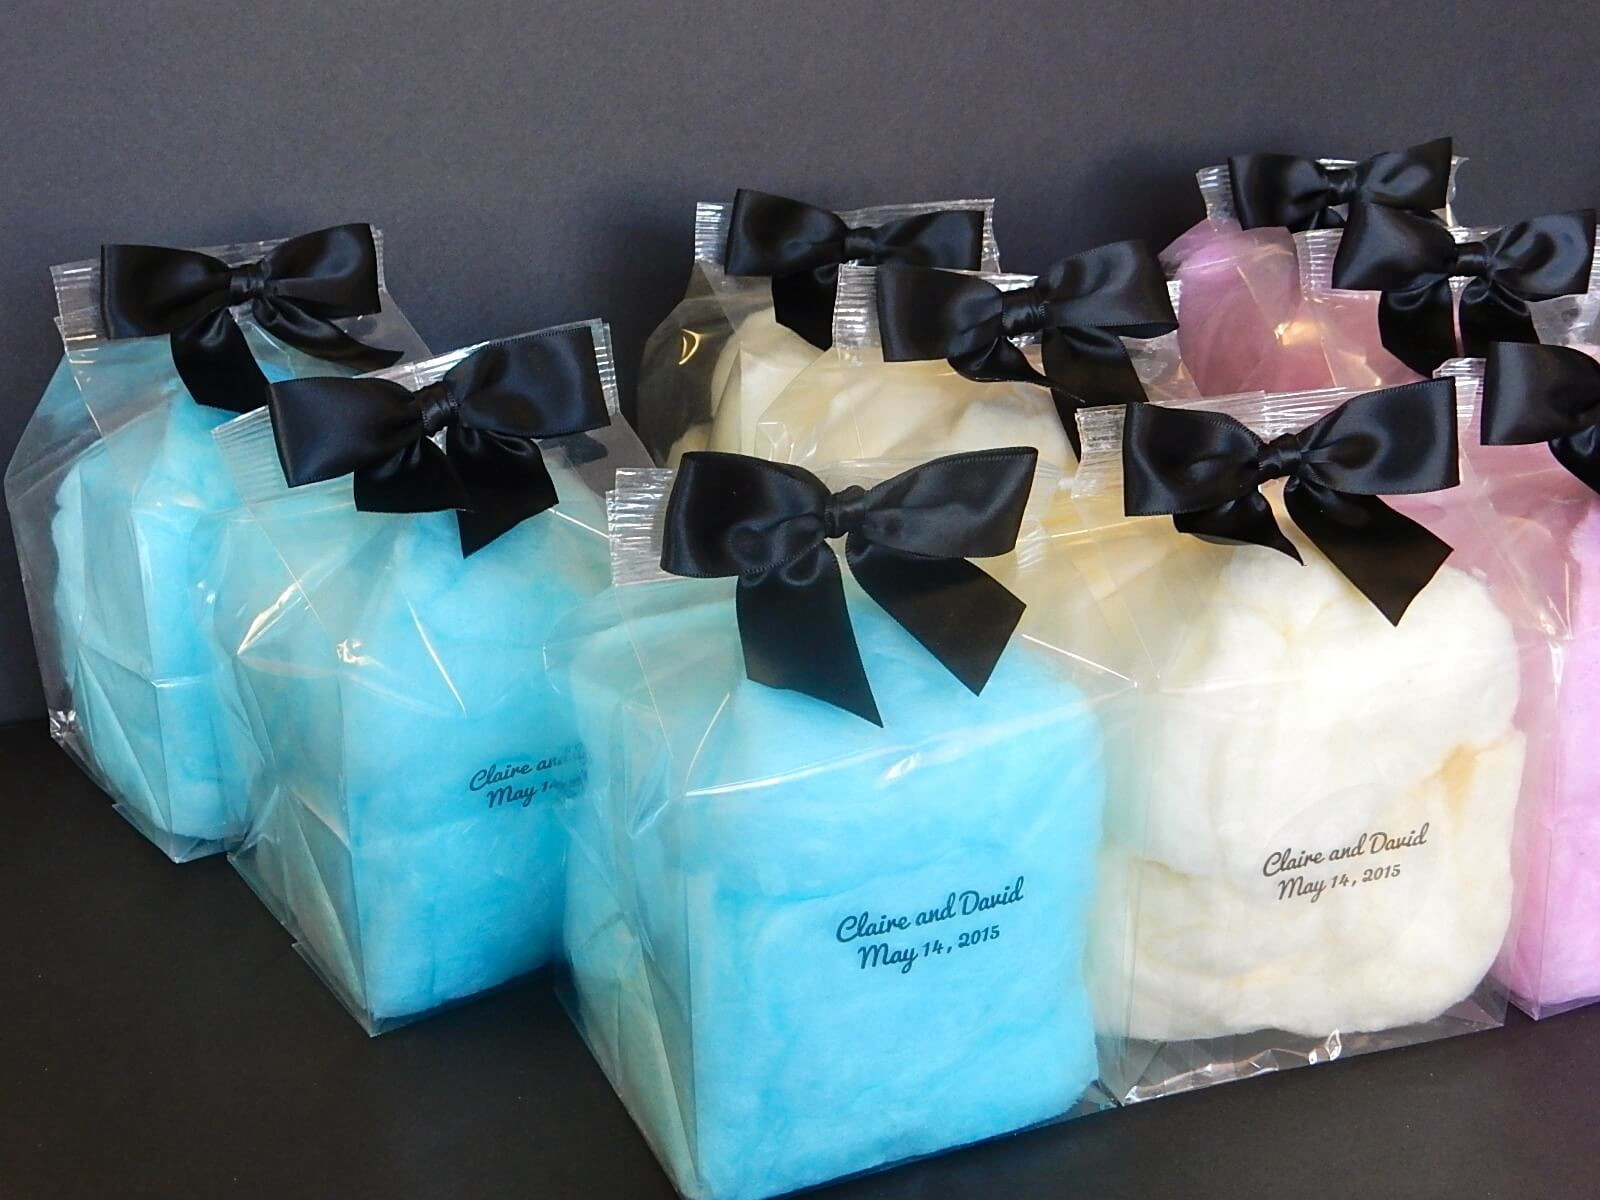 Cotton Candy Wedding Favors
 Spinn Candy experts in creating candy wedding favors in